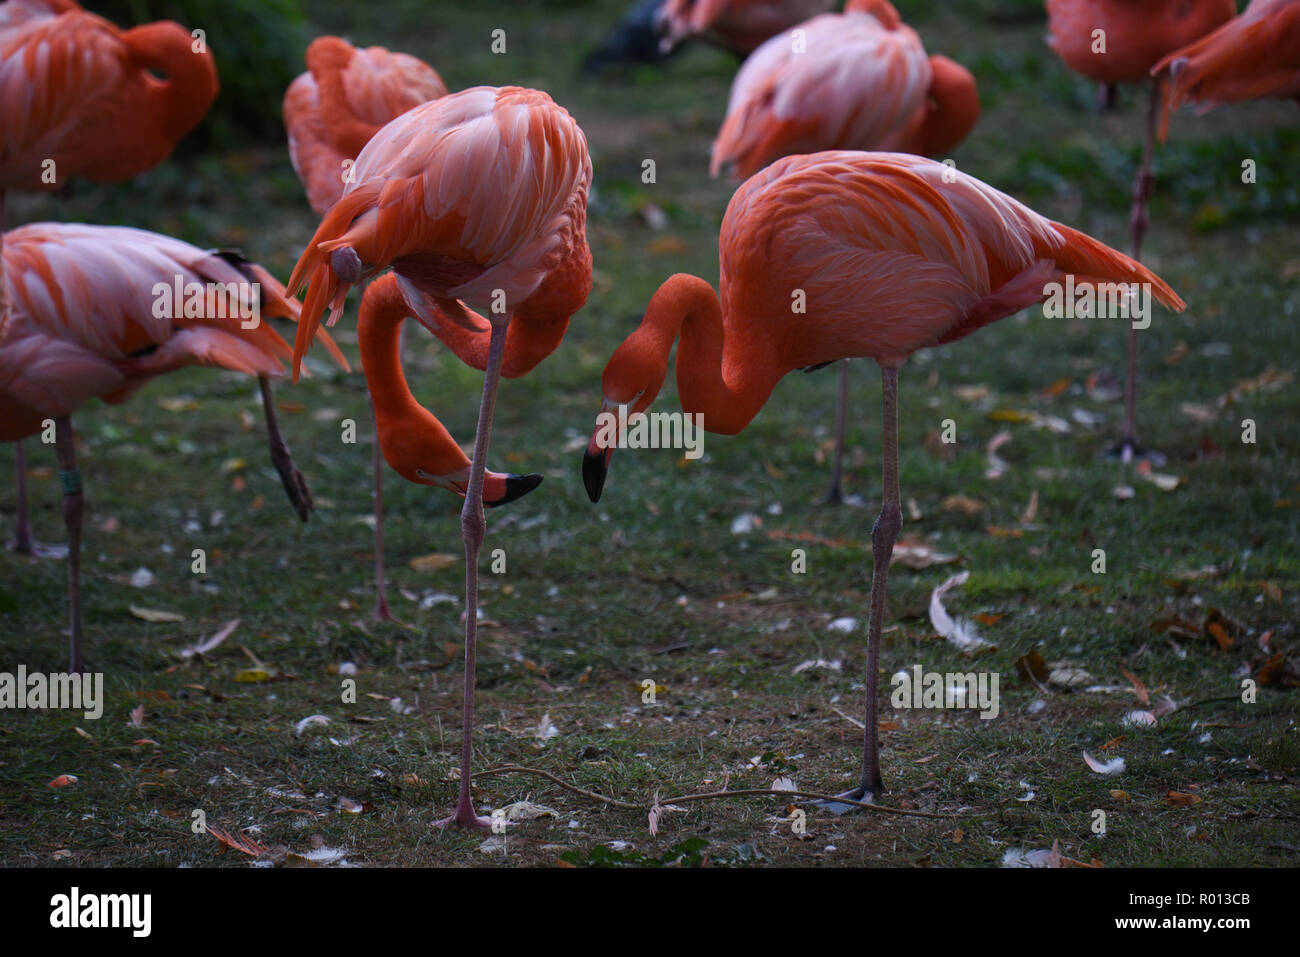 October 26, 2018 - Paris, France: Flamingos at the zoo of the French National Museum of Natural History. Des flamants roses a la menagerie du Jardin des Plantes. *** FRANCE OUT / NO SALES TO FRENCH MEDIA *** Stock Photo